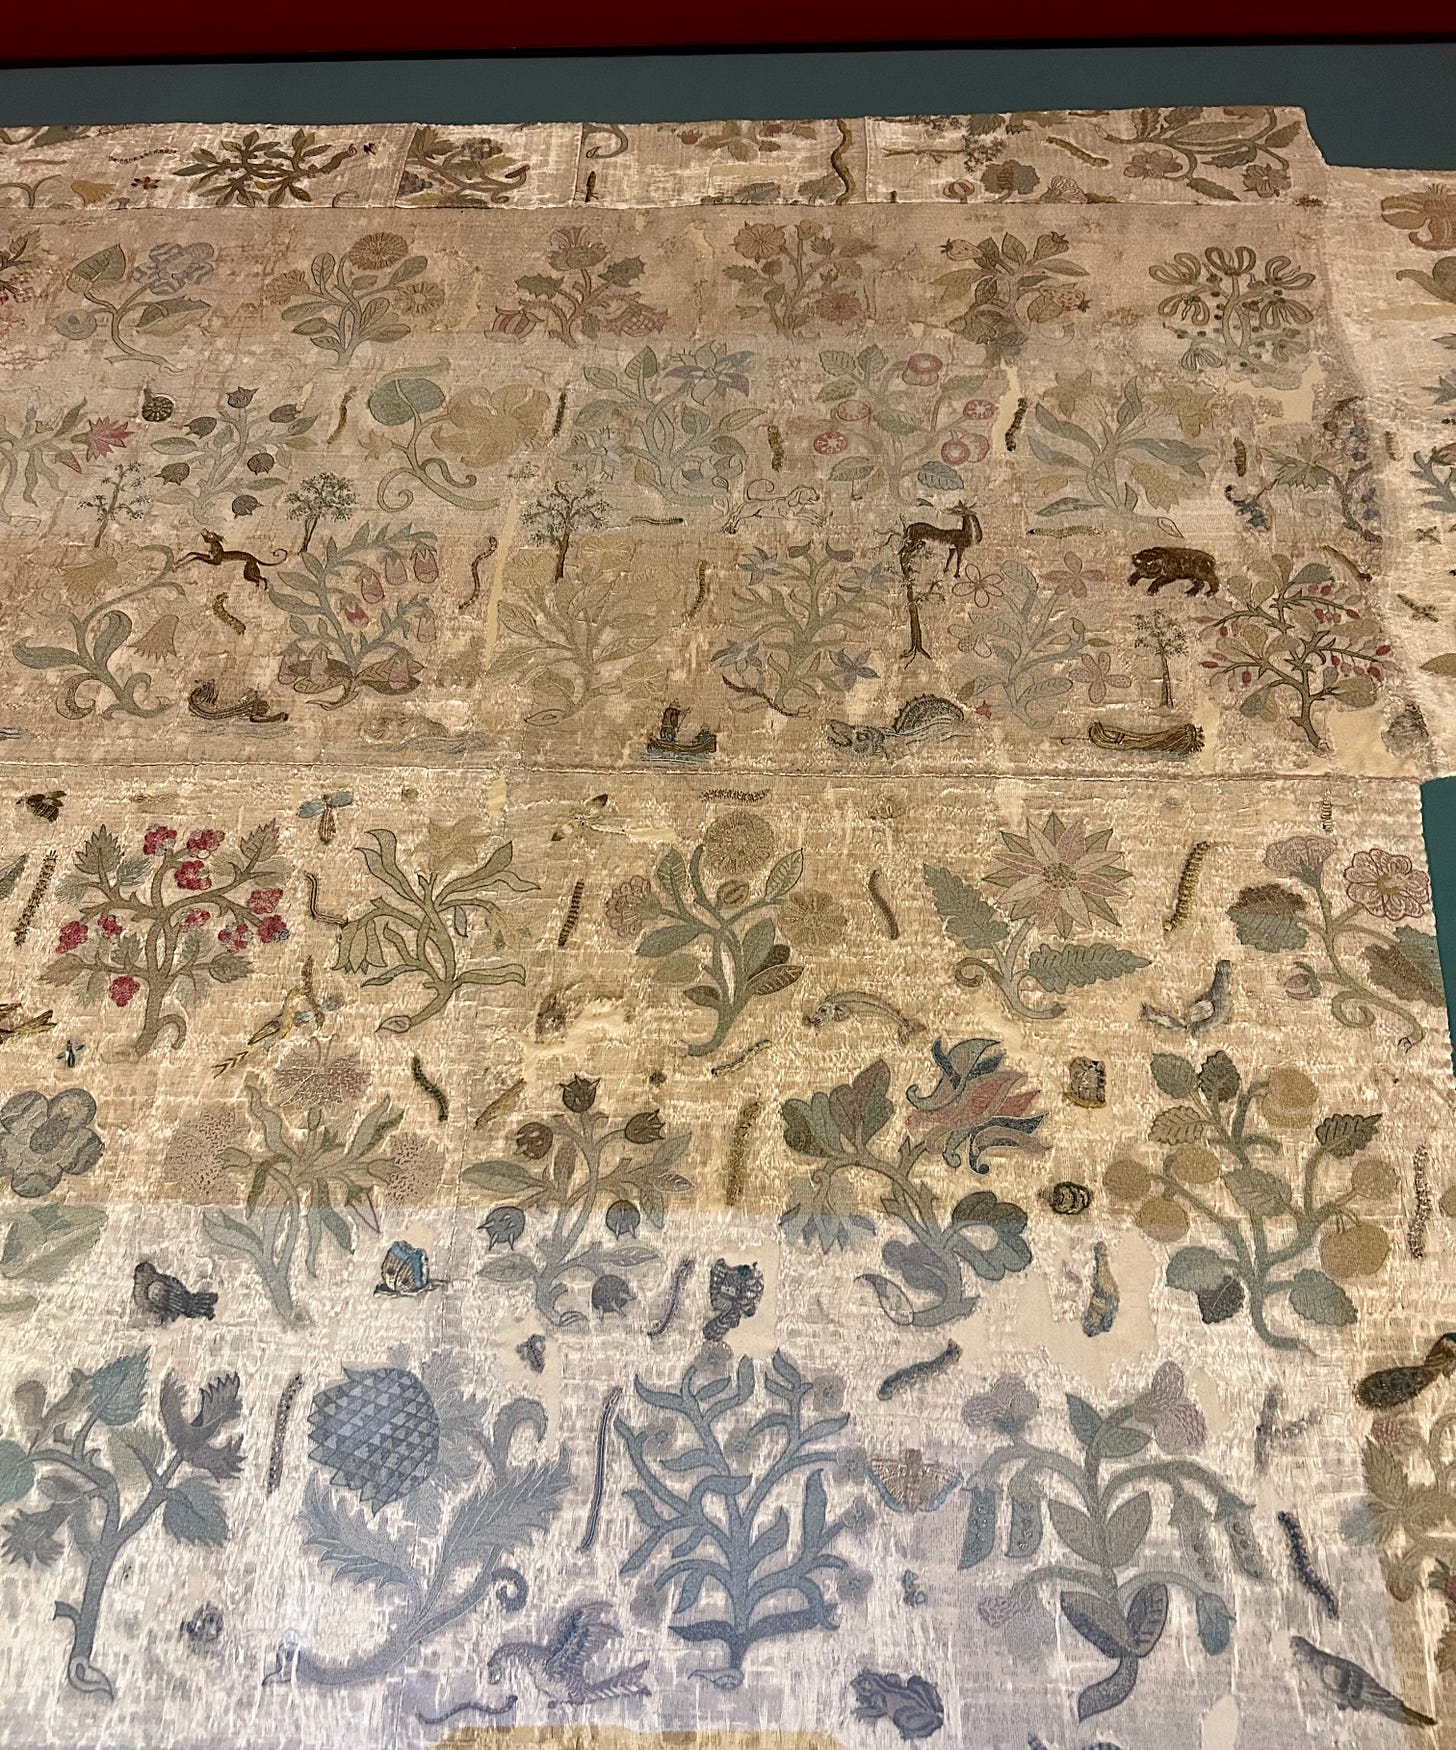 A grey looking piece of fabric embroidered with plants, and small scale animals including a bear, a deer, and a hunting dog, alongside insects and caterpillars